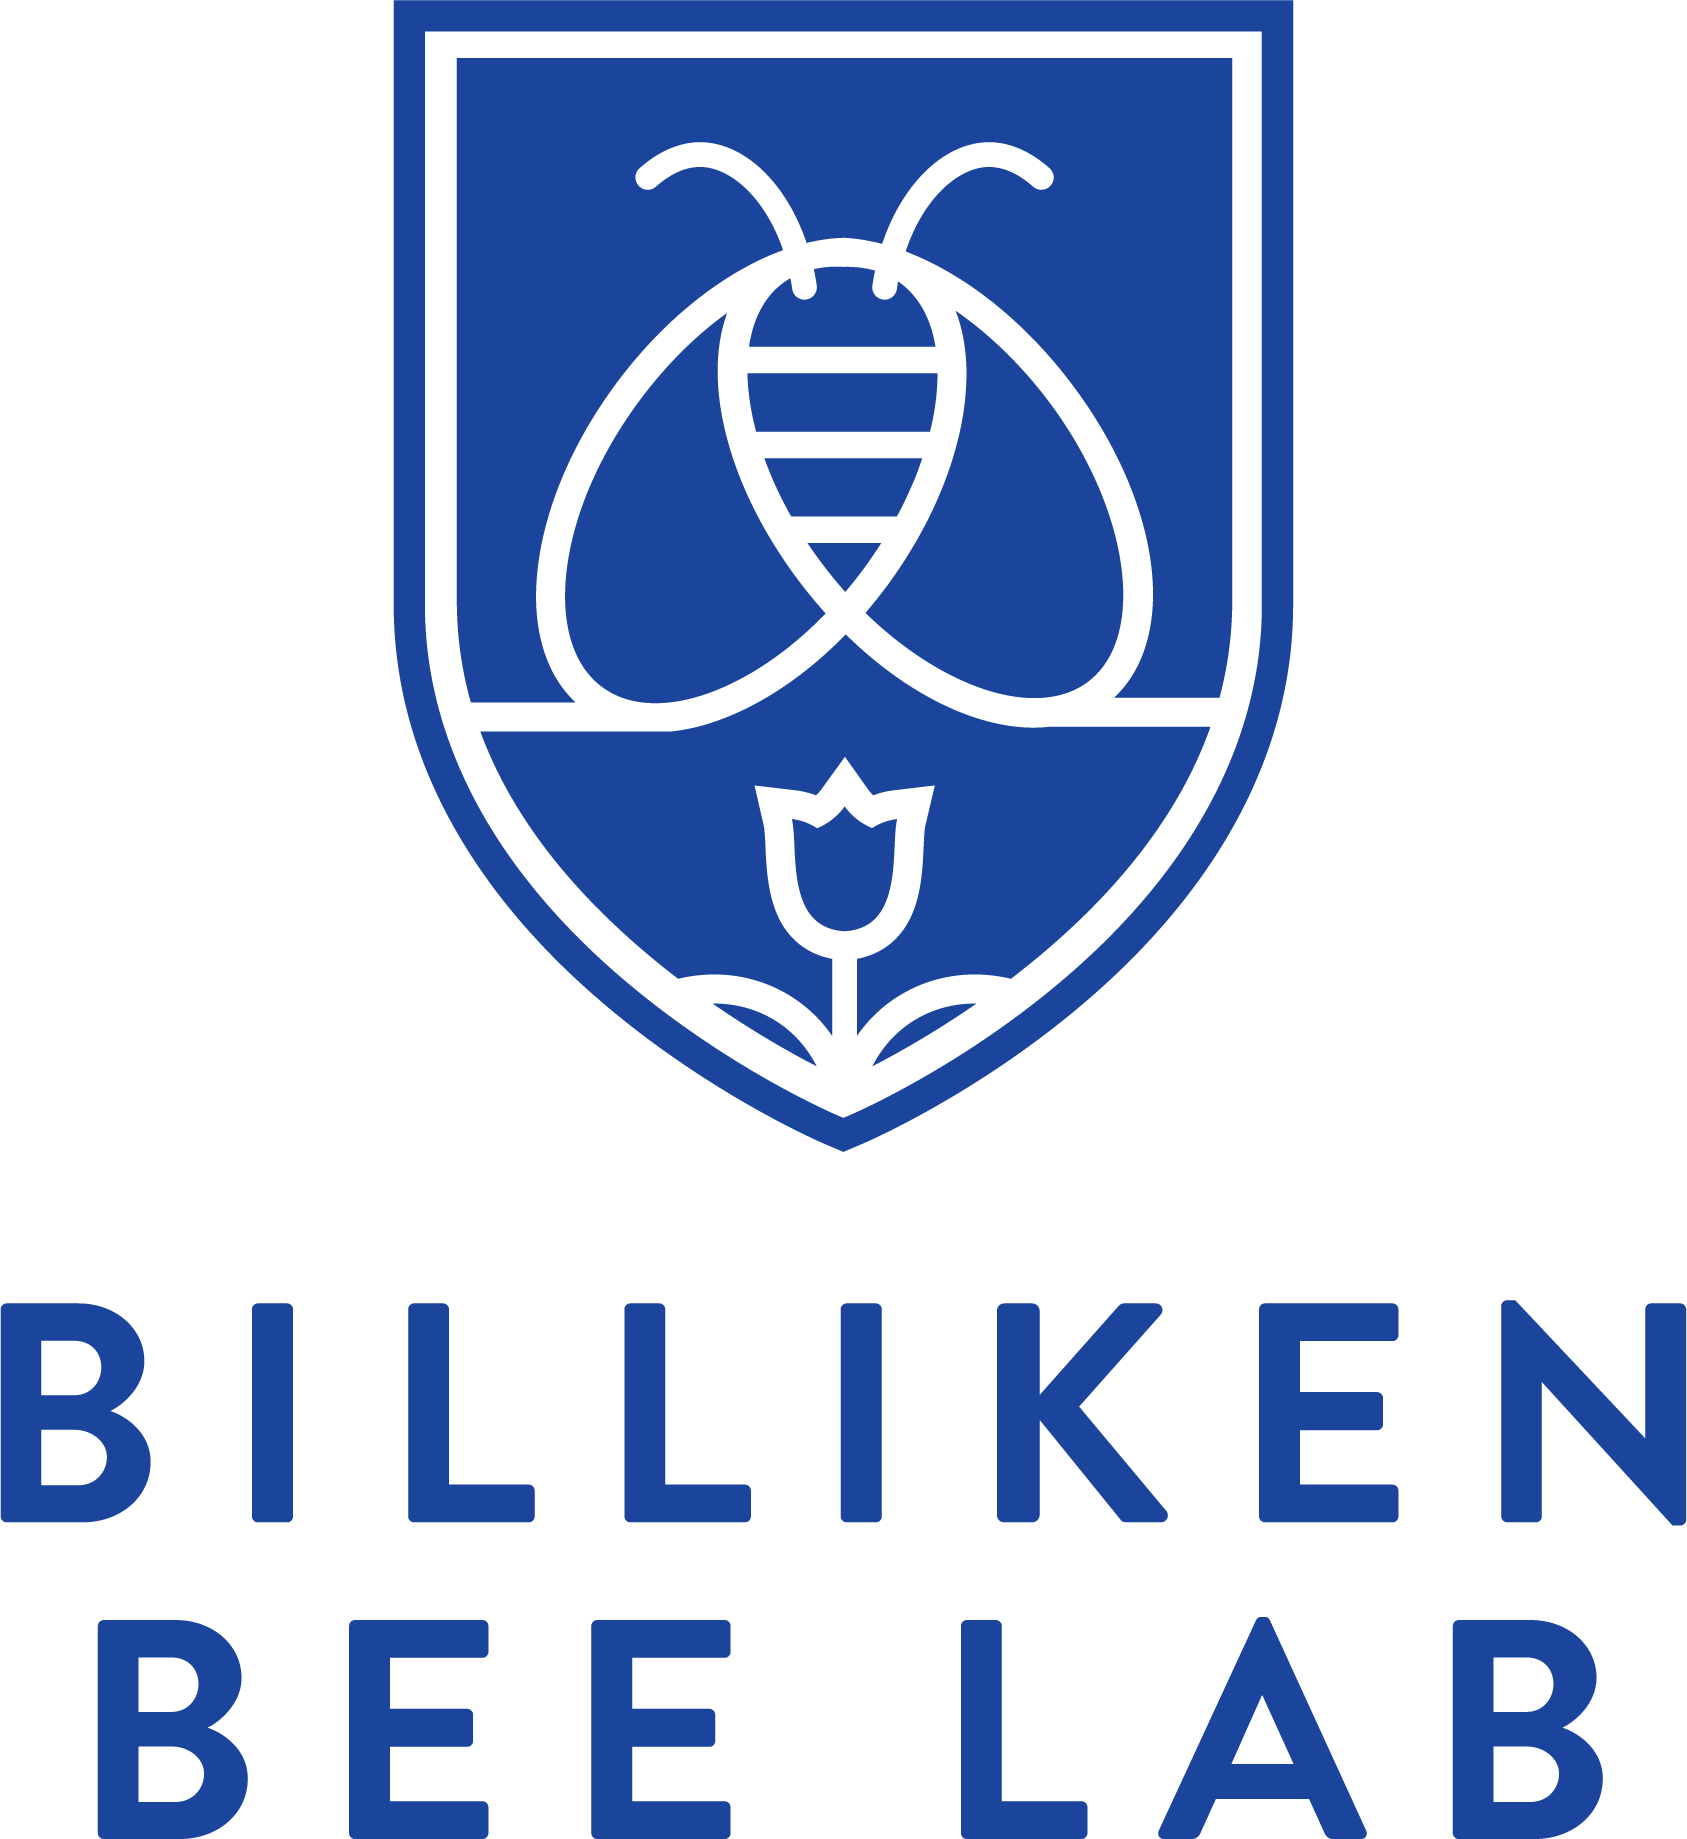 bee_logo tall.png